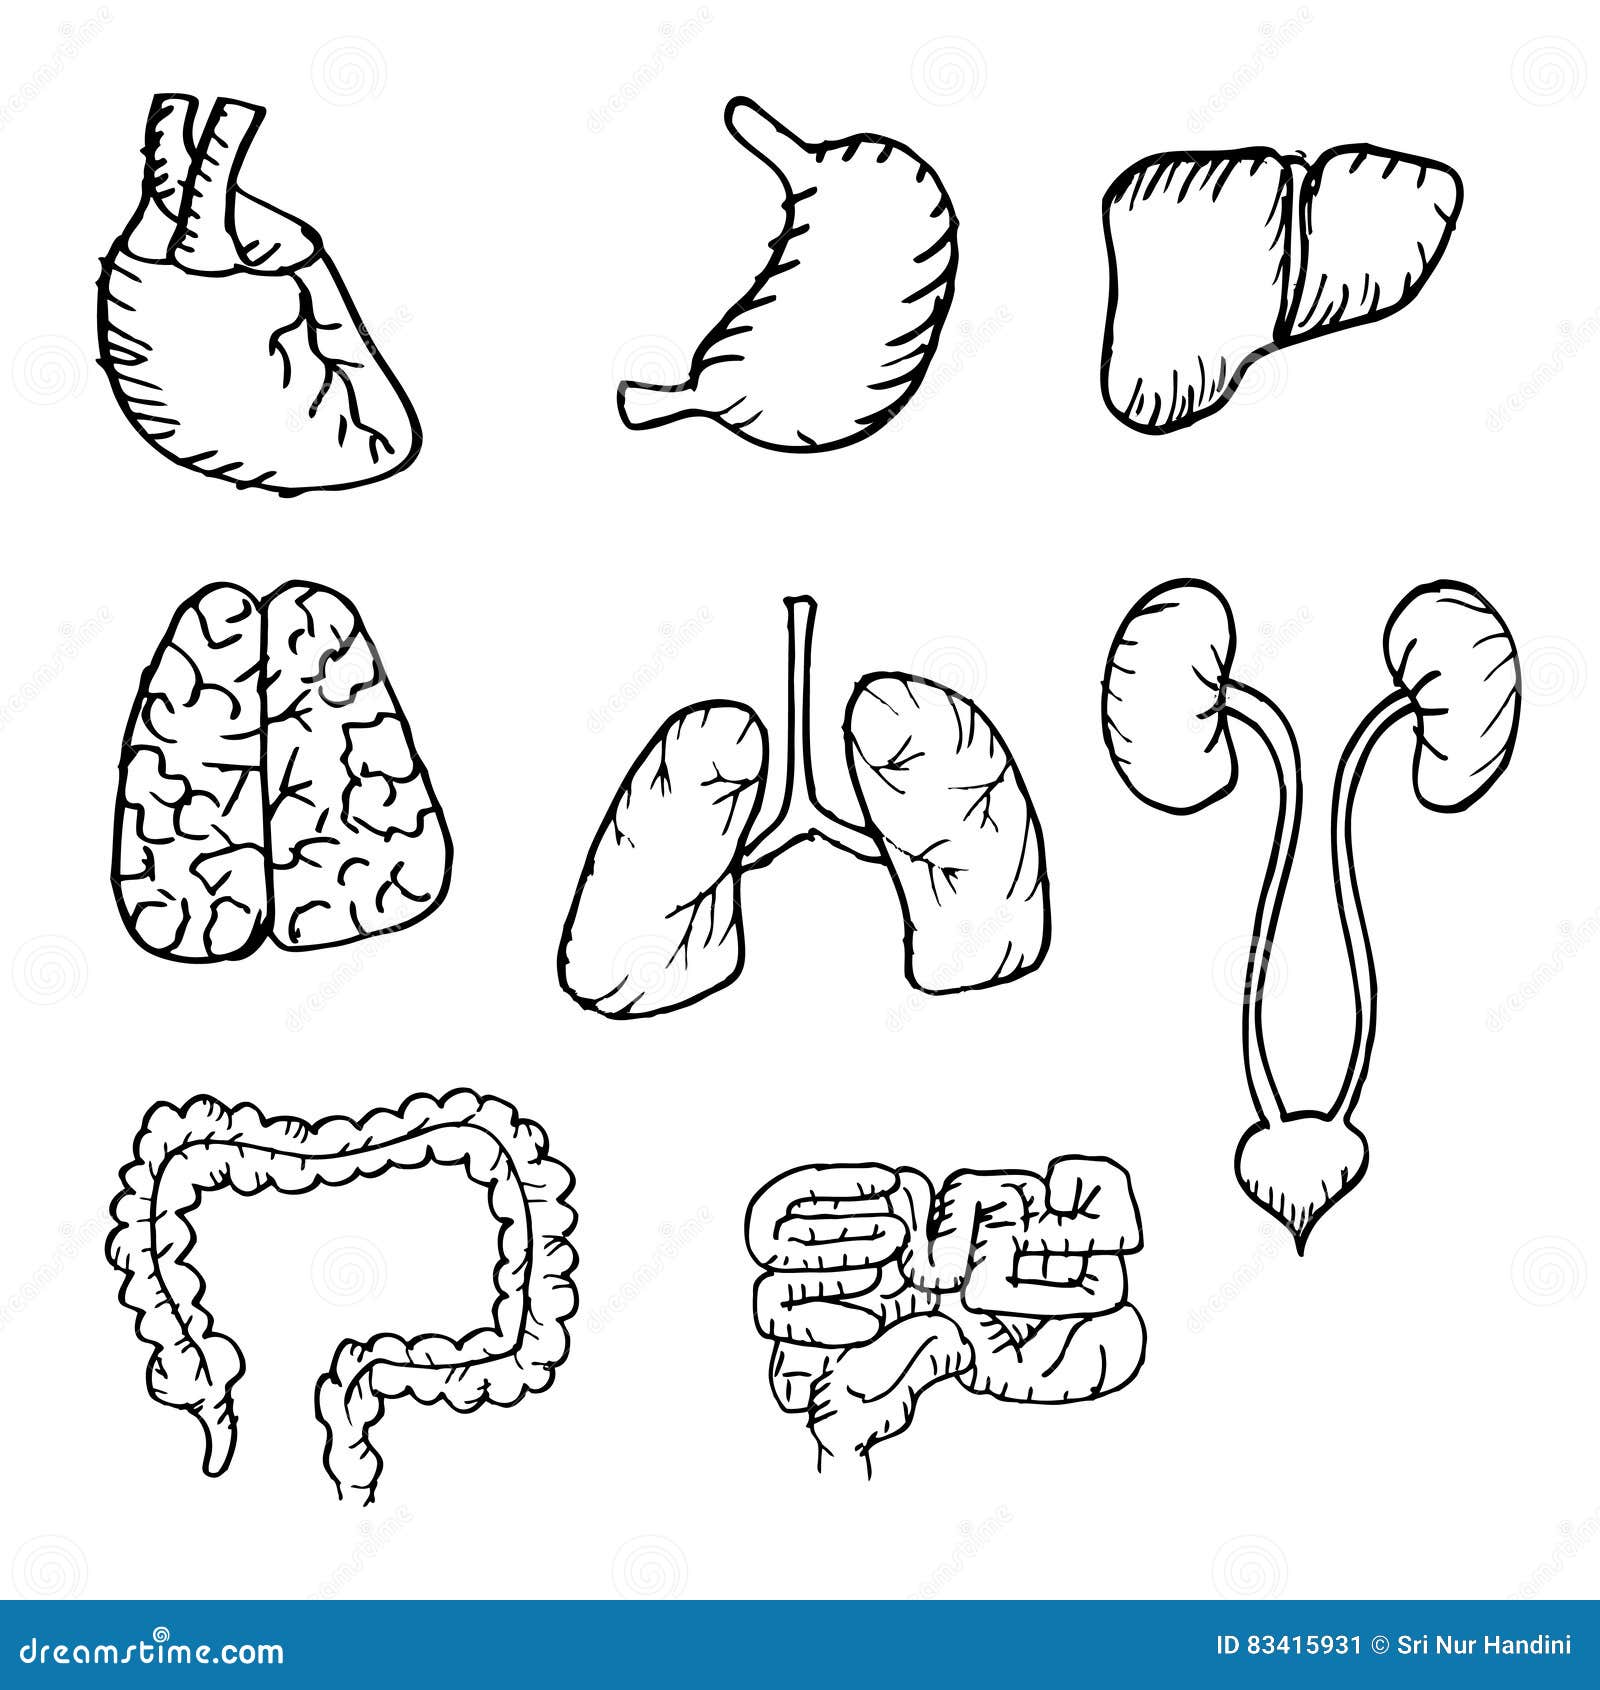 Diagram Of Internal Body Organs Human Organs Coloring Pages For Kids